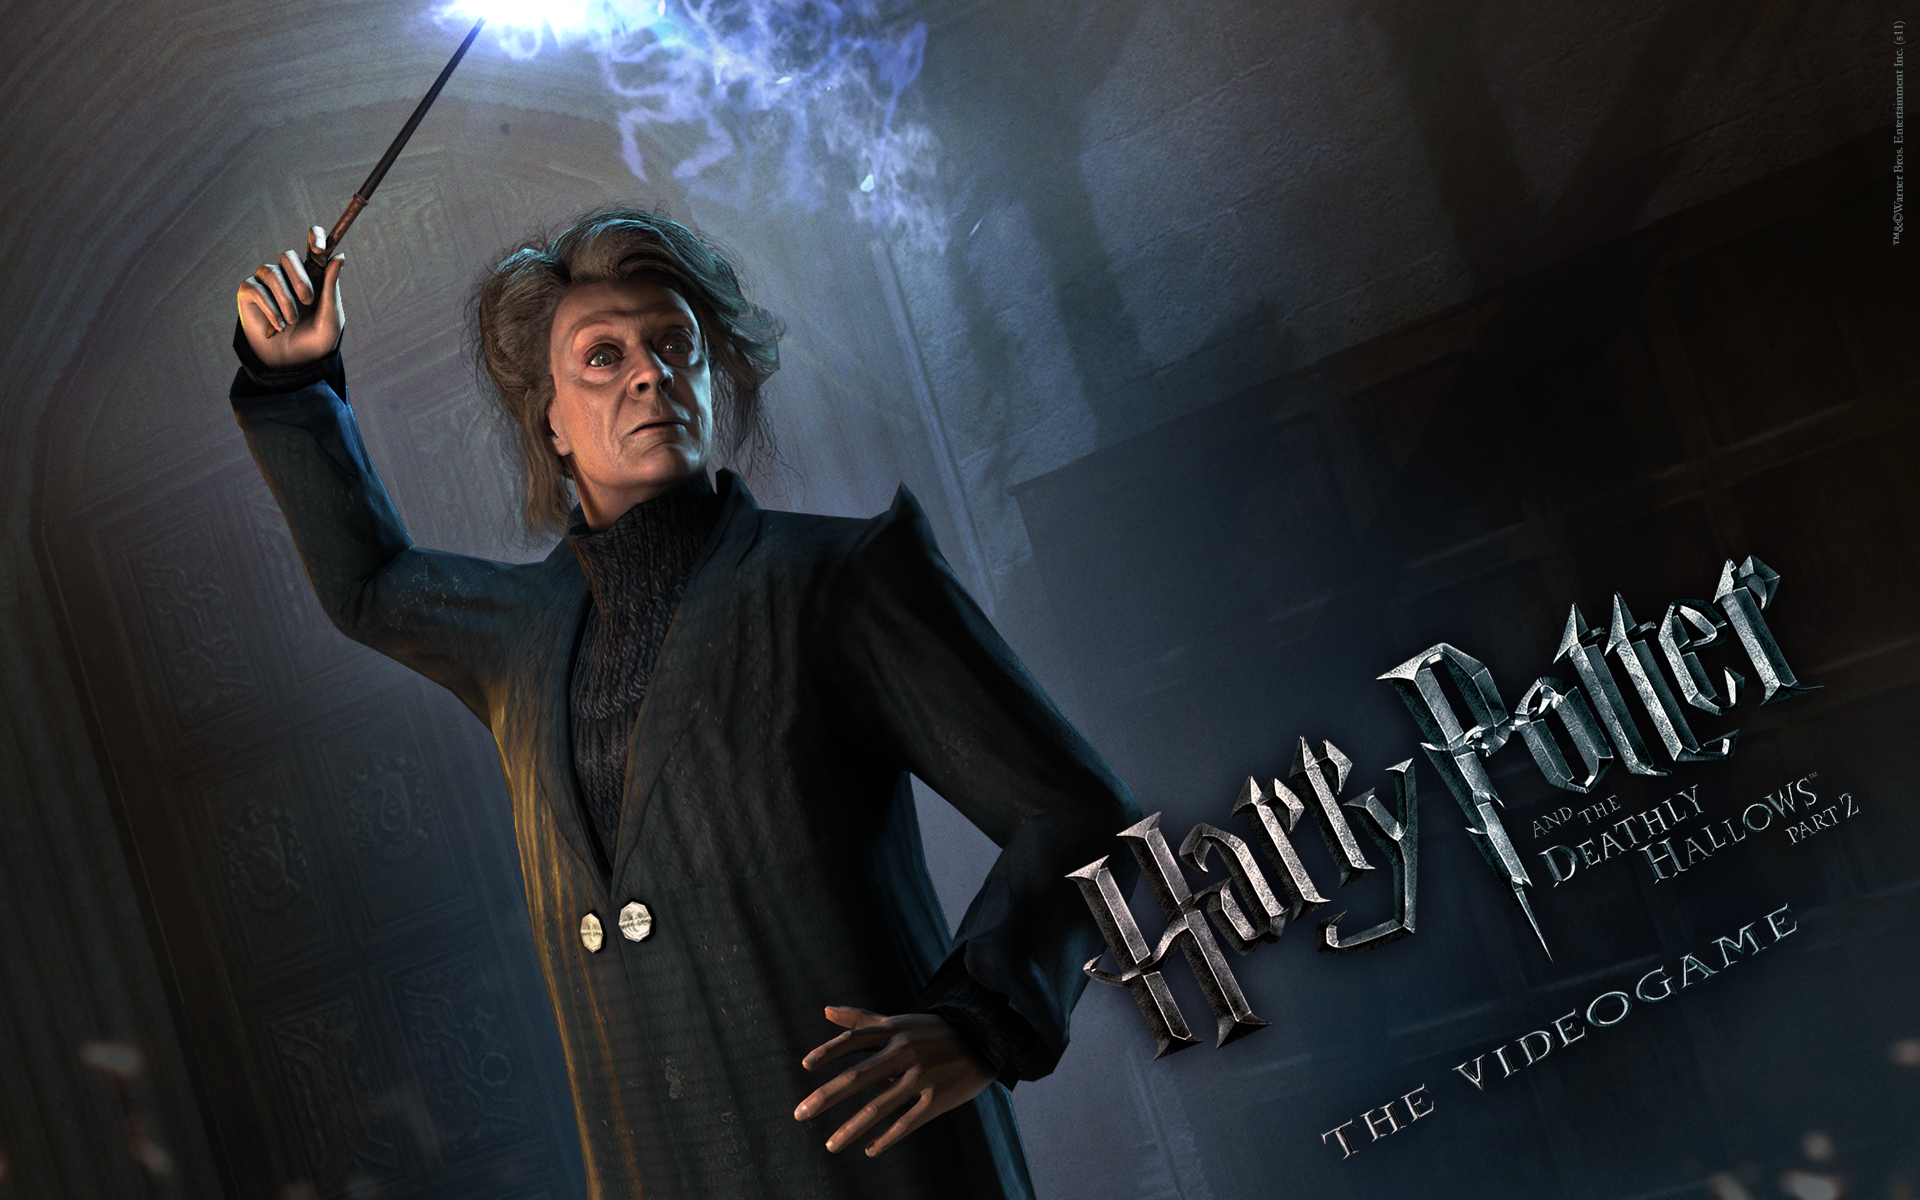 Minerva Wallpaper from Harry Potter and the Deathly Hallows Part 1920x1200